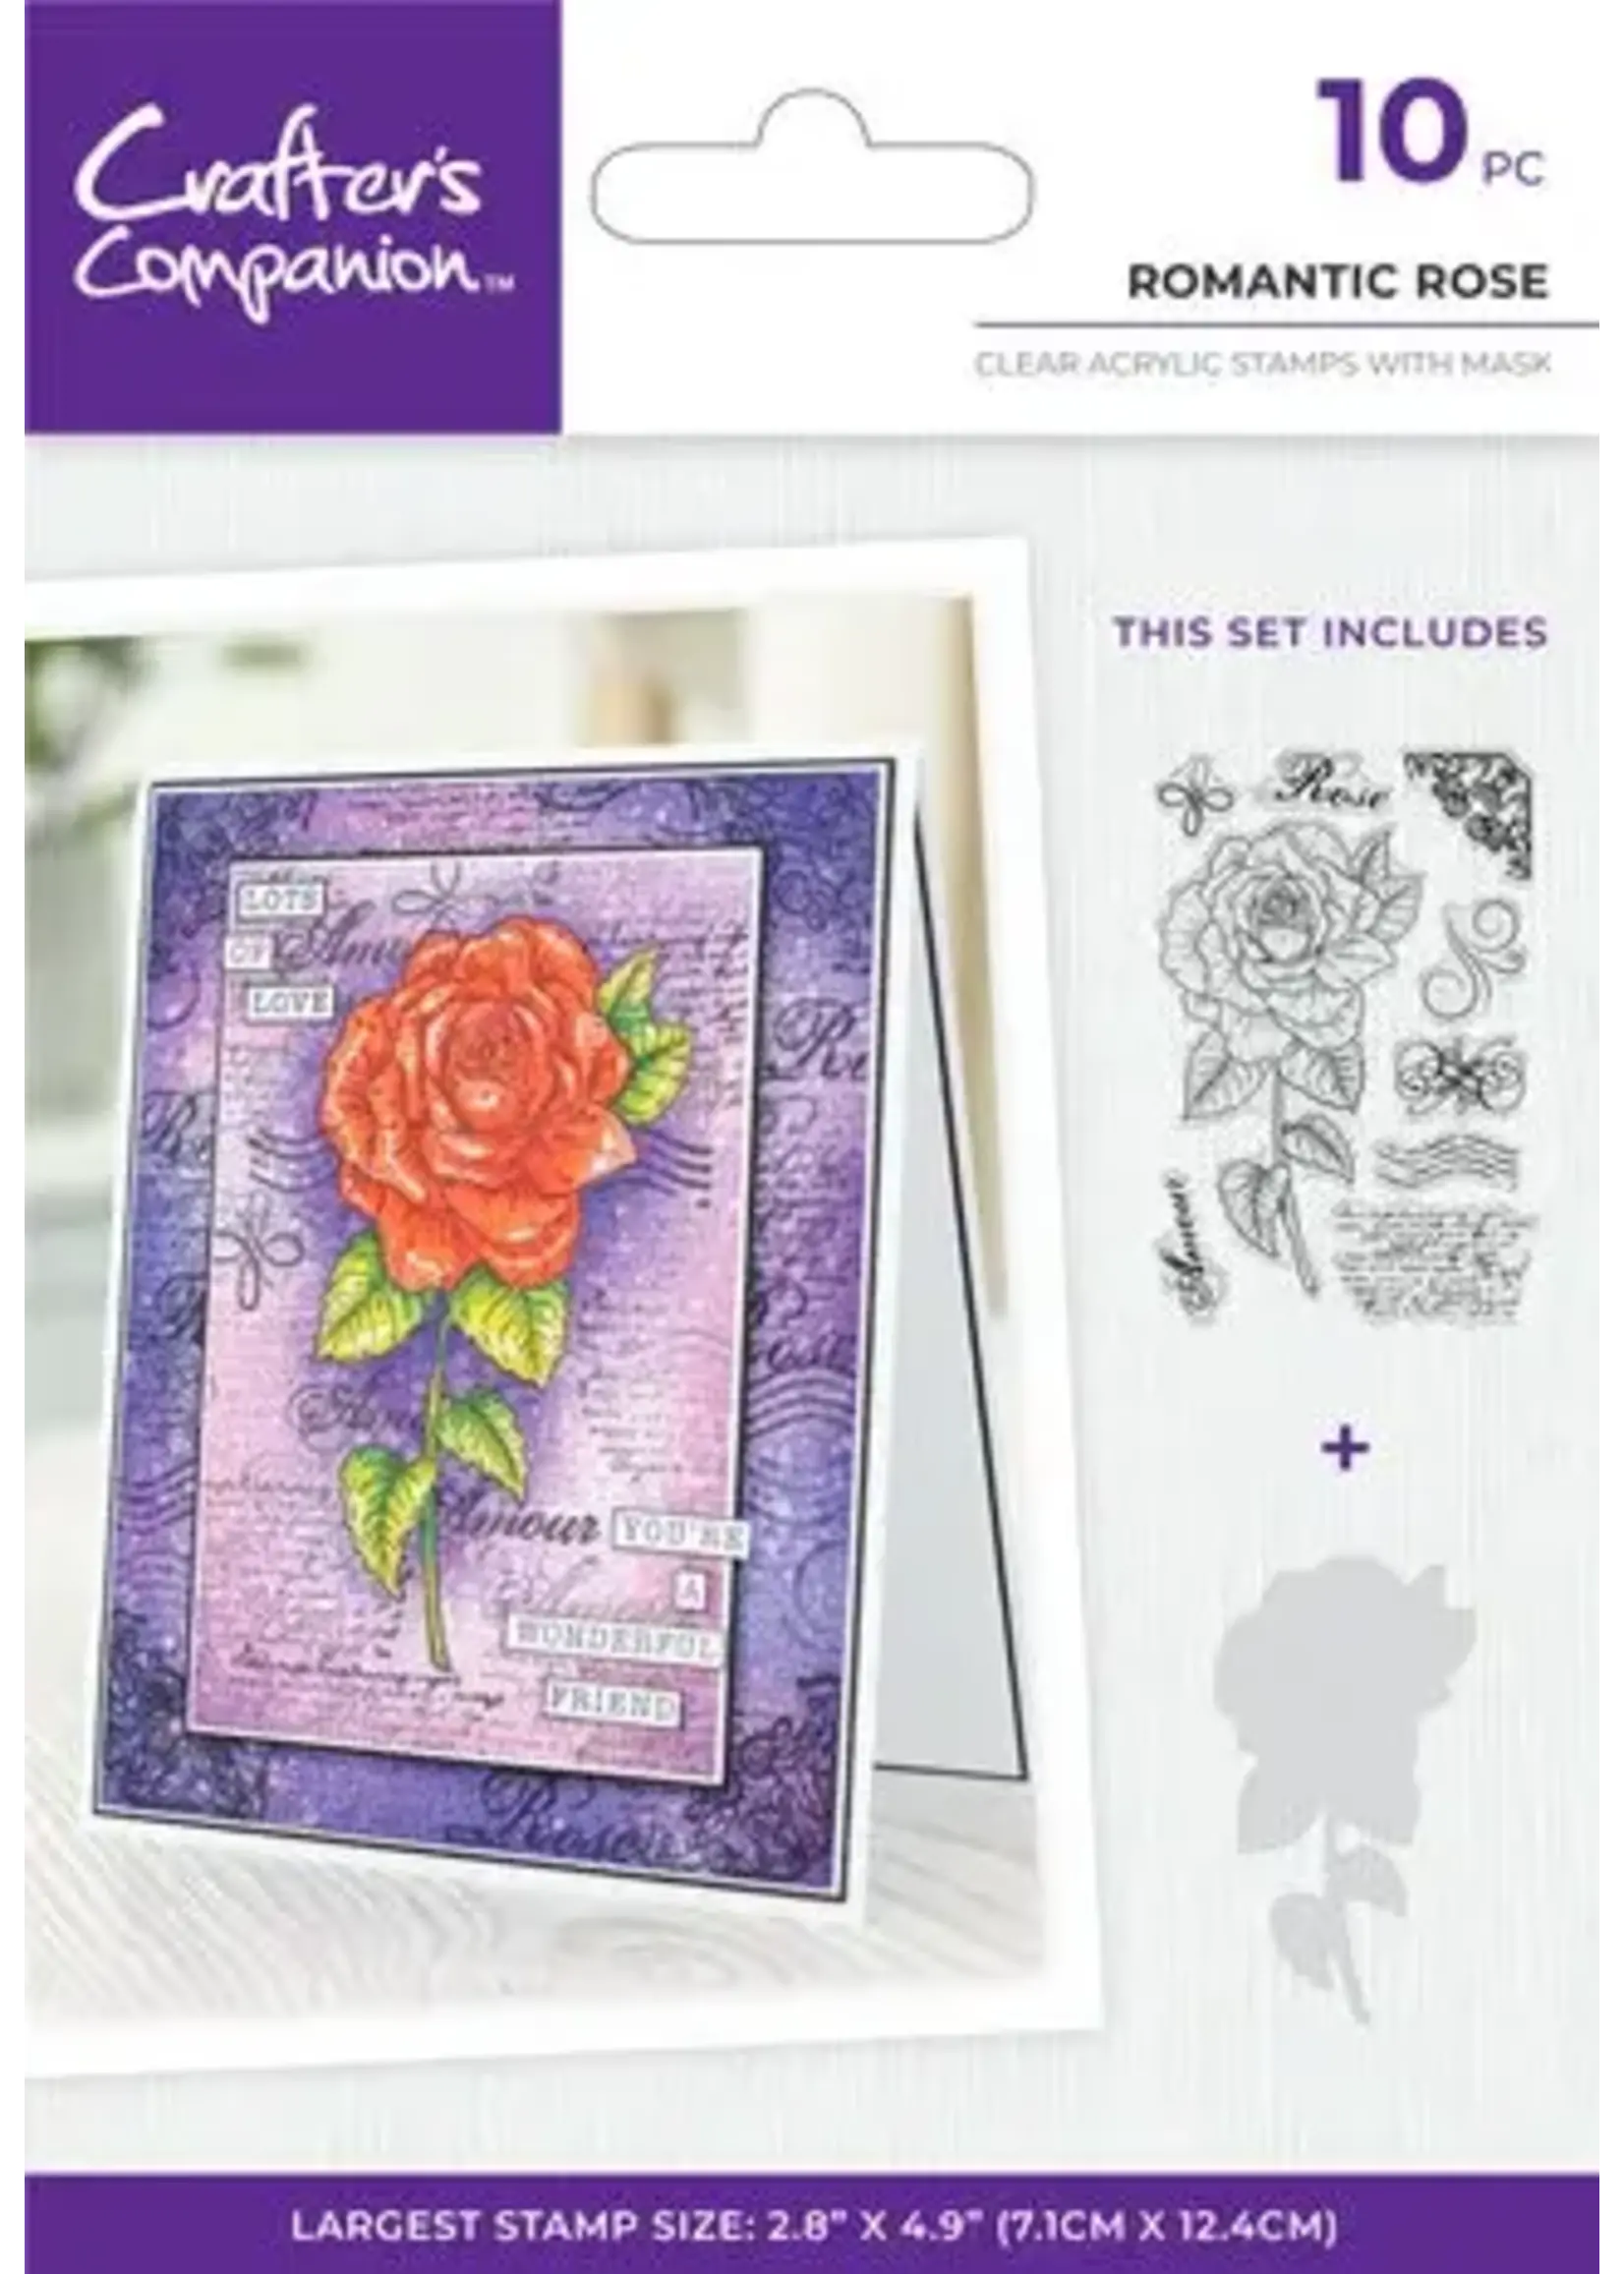 Crafters Companion Floral Collage Clear Stamp w/ Mask 4x6 Inch Romantic Rose (CC-CA-ST-ROMROS)